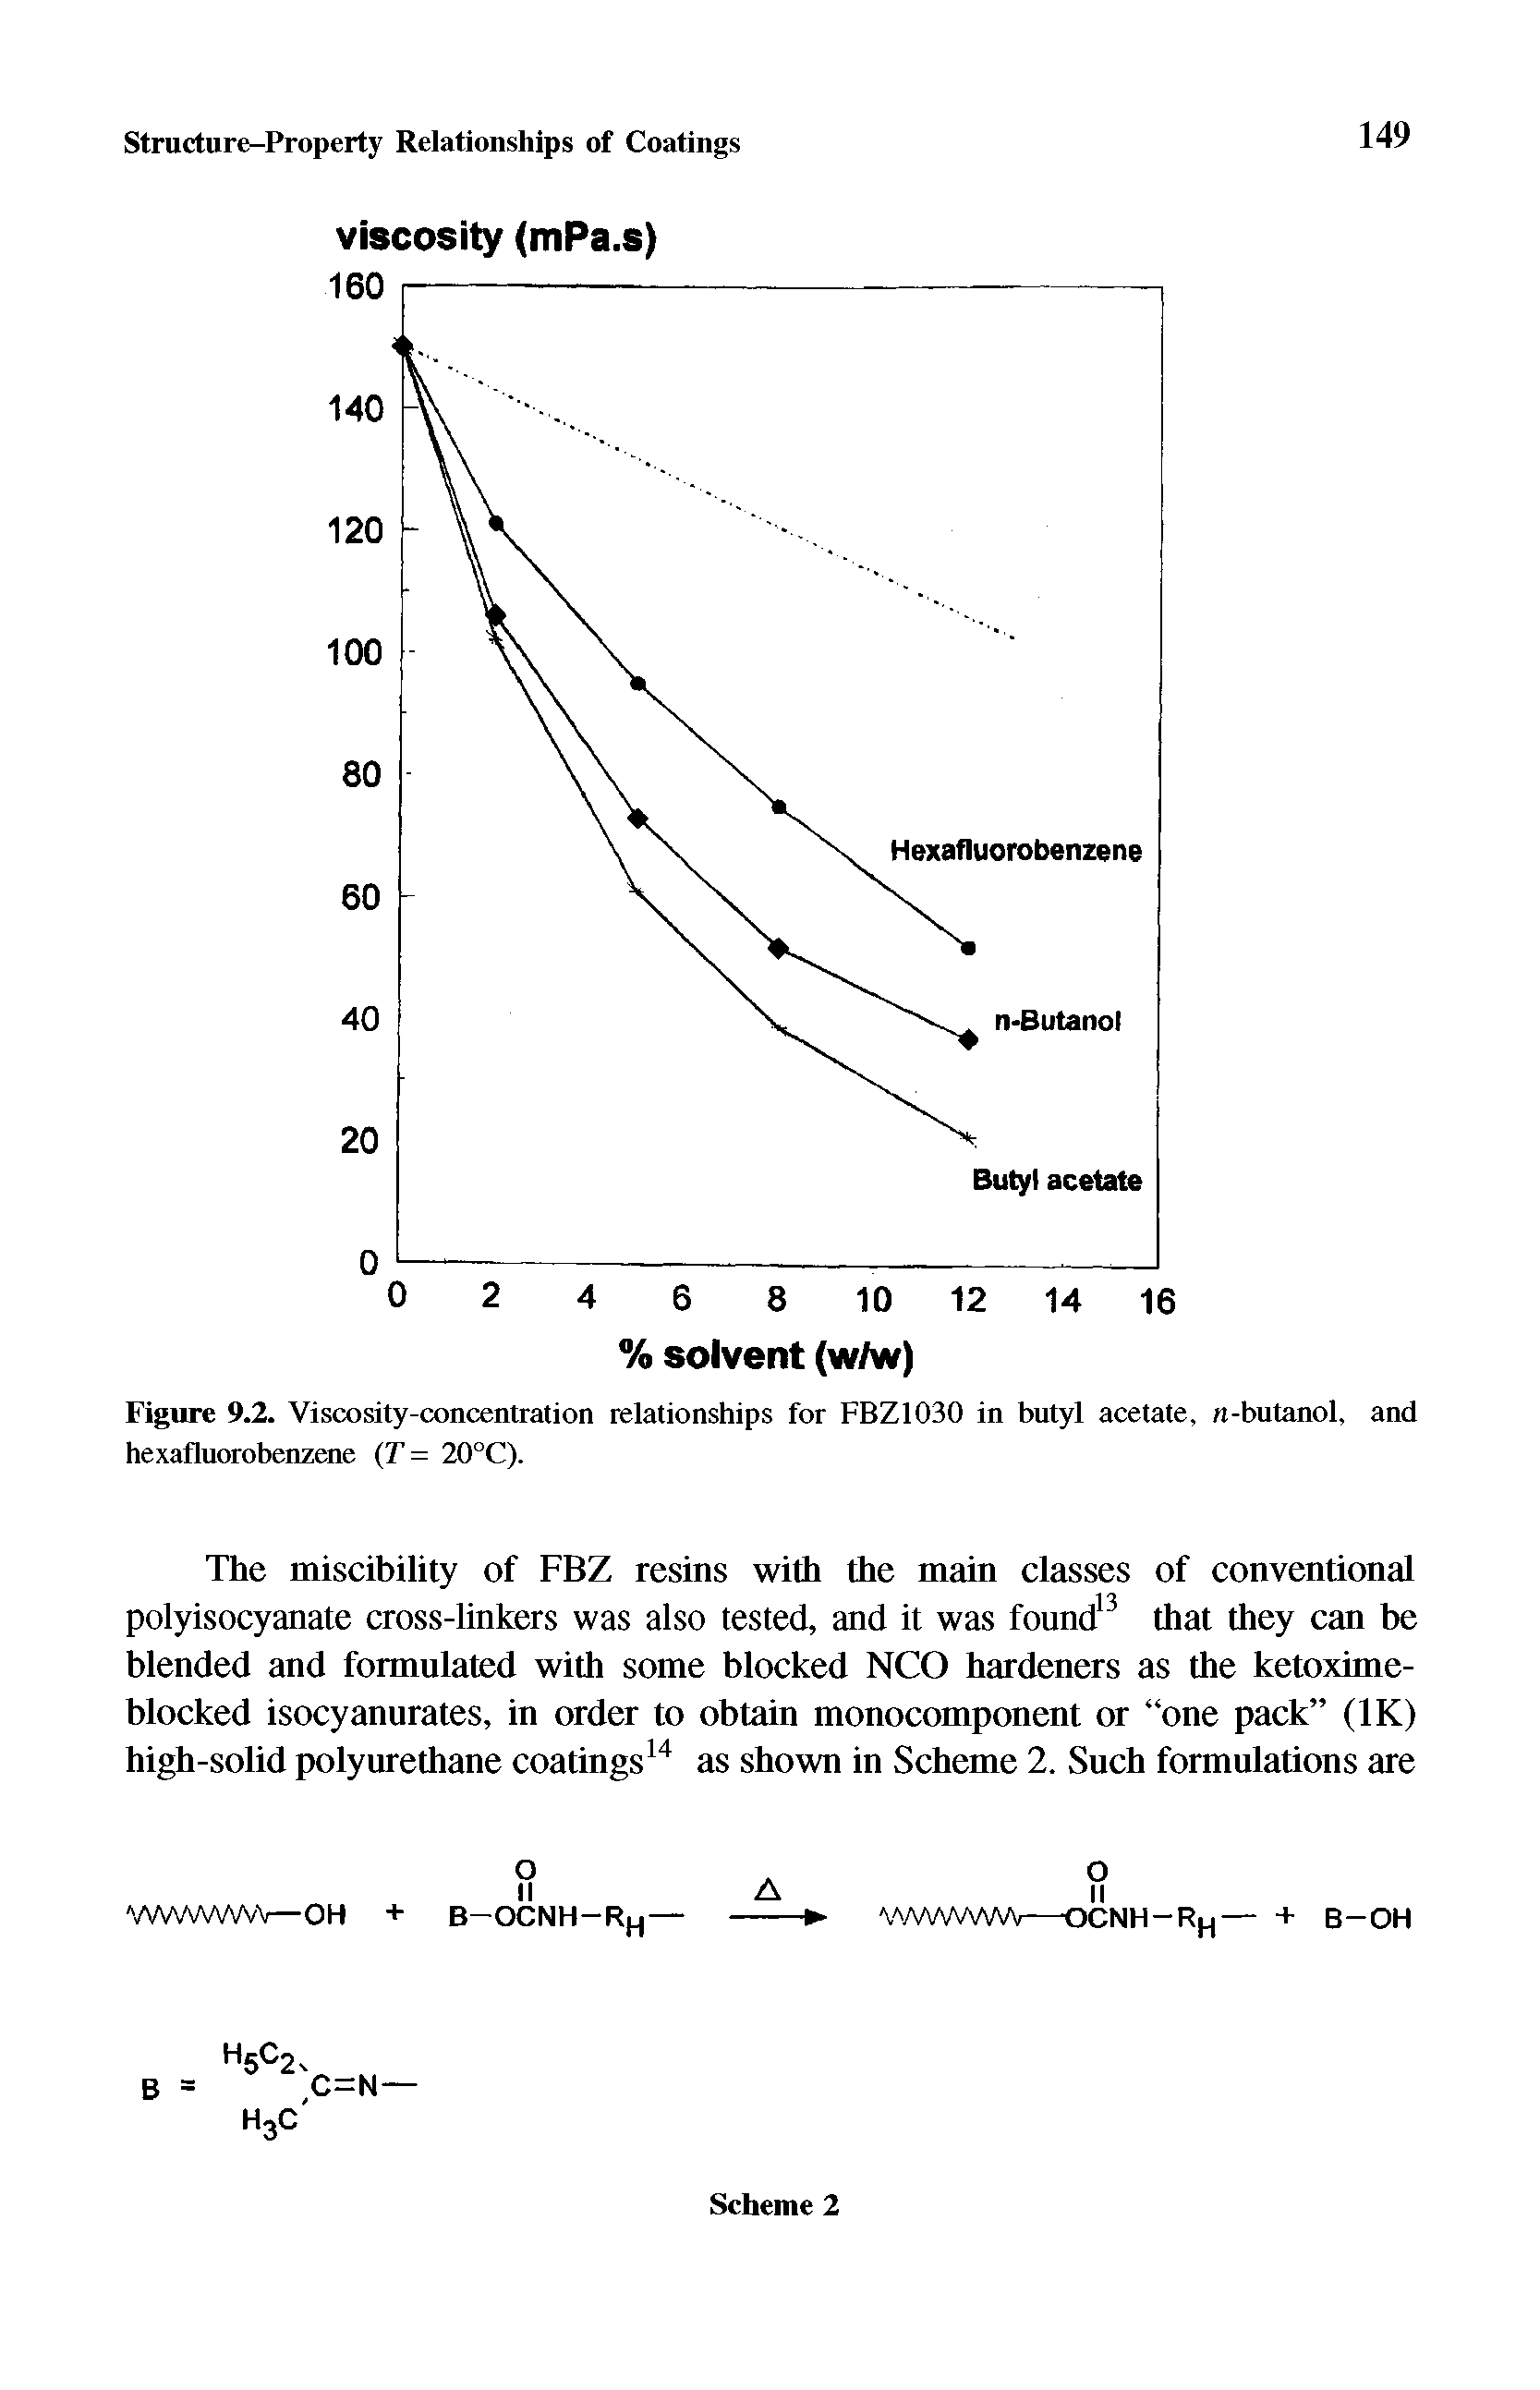 Figure 9.2. Viscosity-concentration relationships for FBZ1030 in butyl acetate, n-butanol, and hexafluorobenzene (T = 20°C).